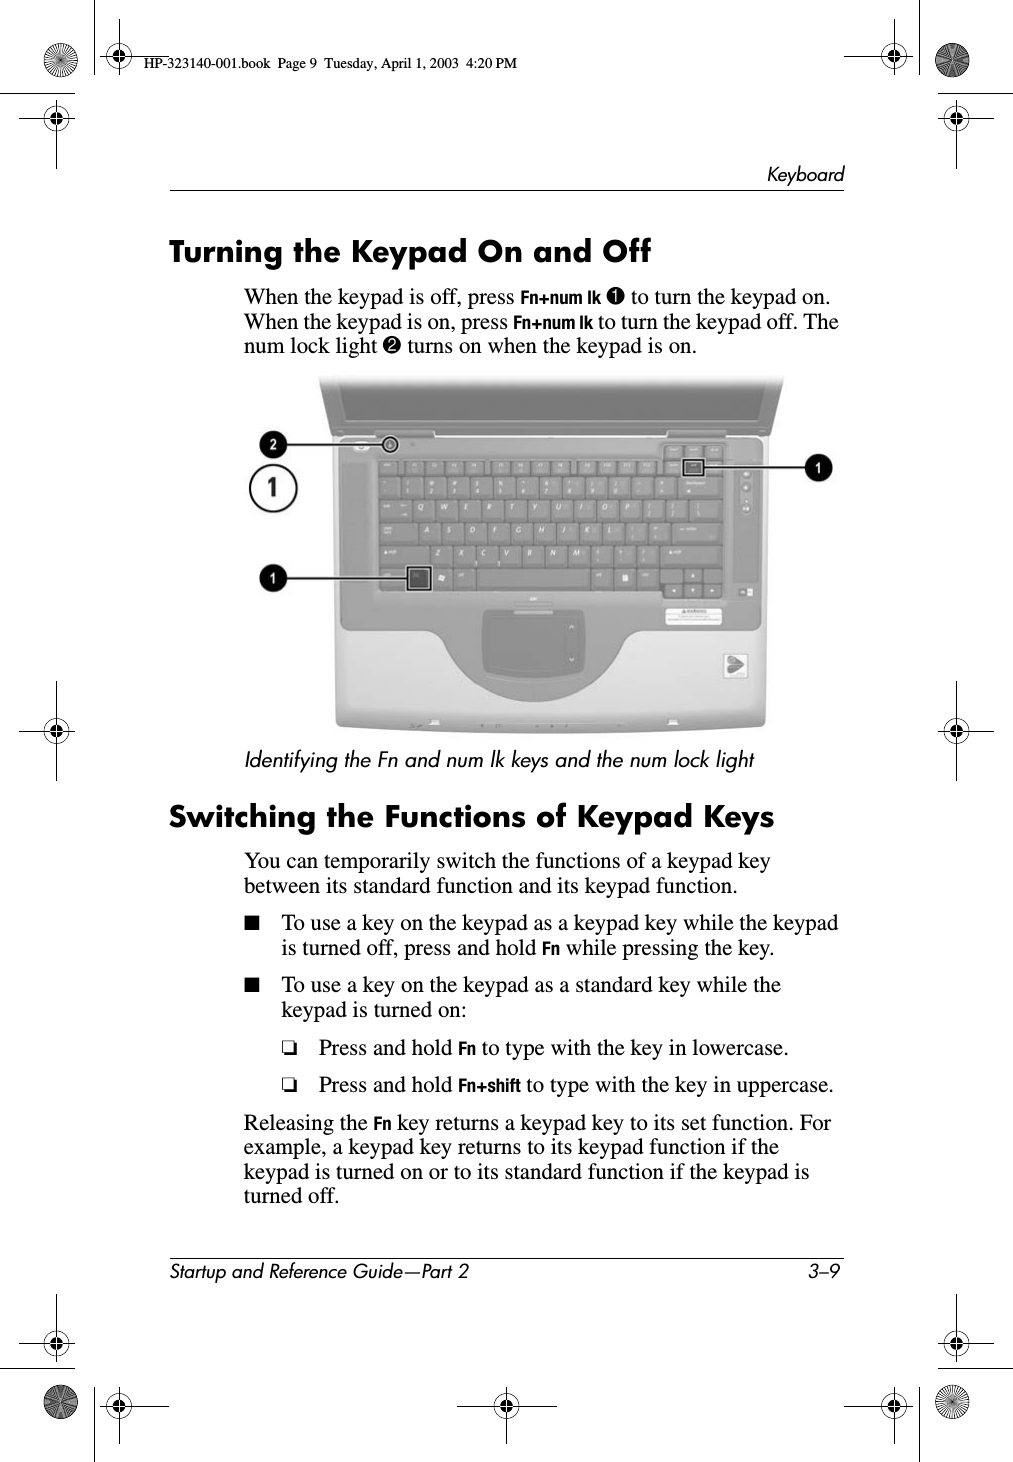 KeyboardStartup and Reference Guide—Part 2 3–9Turning the Keypad On and OffWhen the keypad is off, press Fn+num lk 1 to turn the keypad on. When the keypad is on, press Fn+num lk to turn the keypad off. The num lock light 2 turns on when the keypad is on.Identifying the Fn and num lk keys and the num lock lightSwitching the Functions of Keypad KeysYou can temporarily switch the functions of a keypad key between its standard function and its keypad function.■To use a key on the keypad as a keypad key while the keypad is turned off, press and hold Fn while pressing the key.■To use a key on the keypad as a standard key while the keypad is turned on: ❏Press and hold Fn to type with the key in lowercase.❏Press and hold Fn+shift to type with the key in uppercase.Releasing the Fn key returns a keypad key to its set function. For example, a keypad key returns to its keypad function if the keypad is turned on or to its standard function if the keypad is turned off.HP-323140-001.book  Page 9  Tuesday, April 1, 2003  4:20 PM